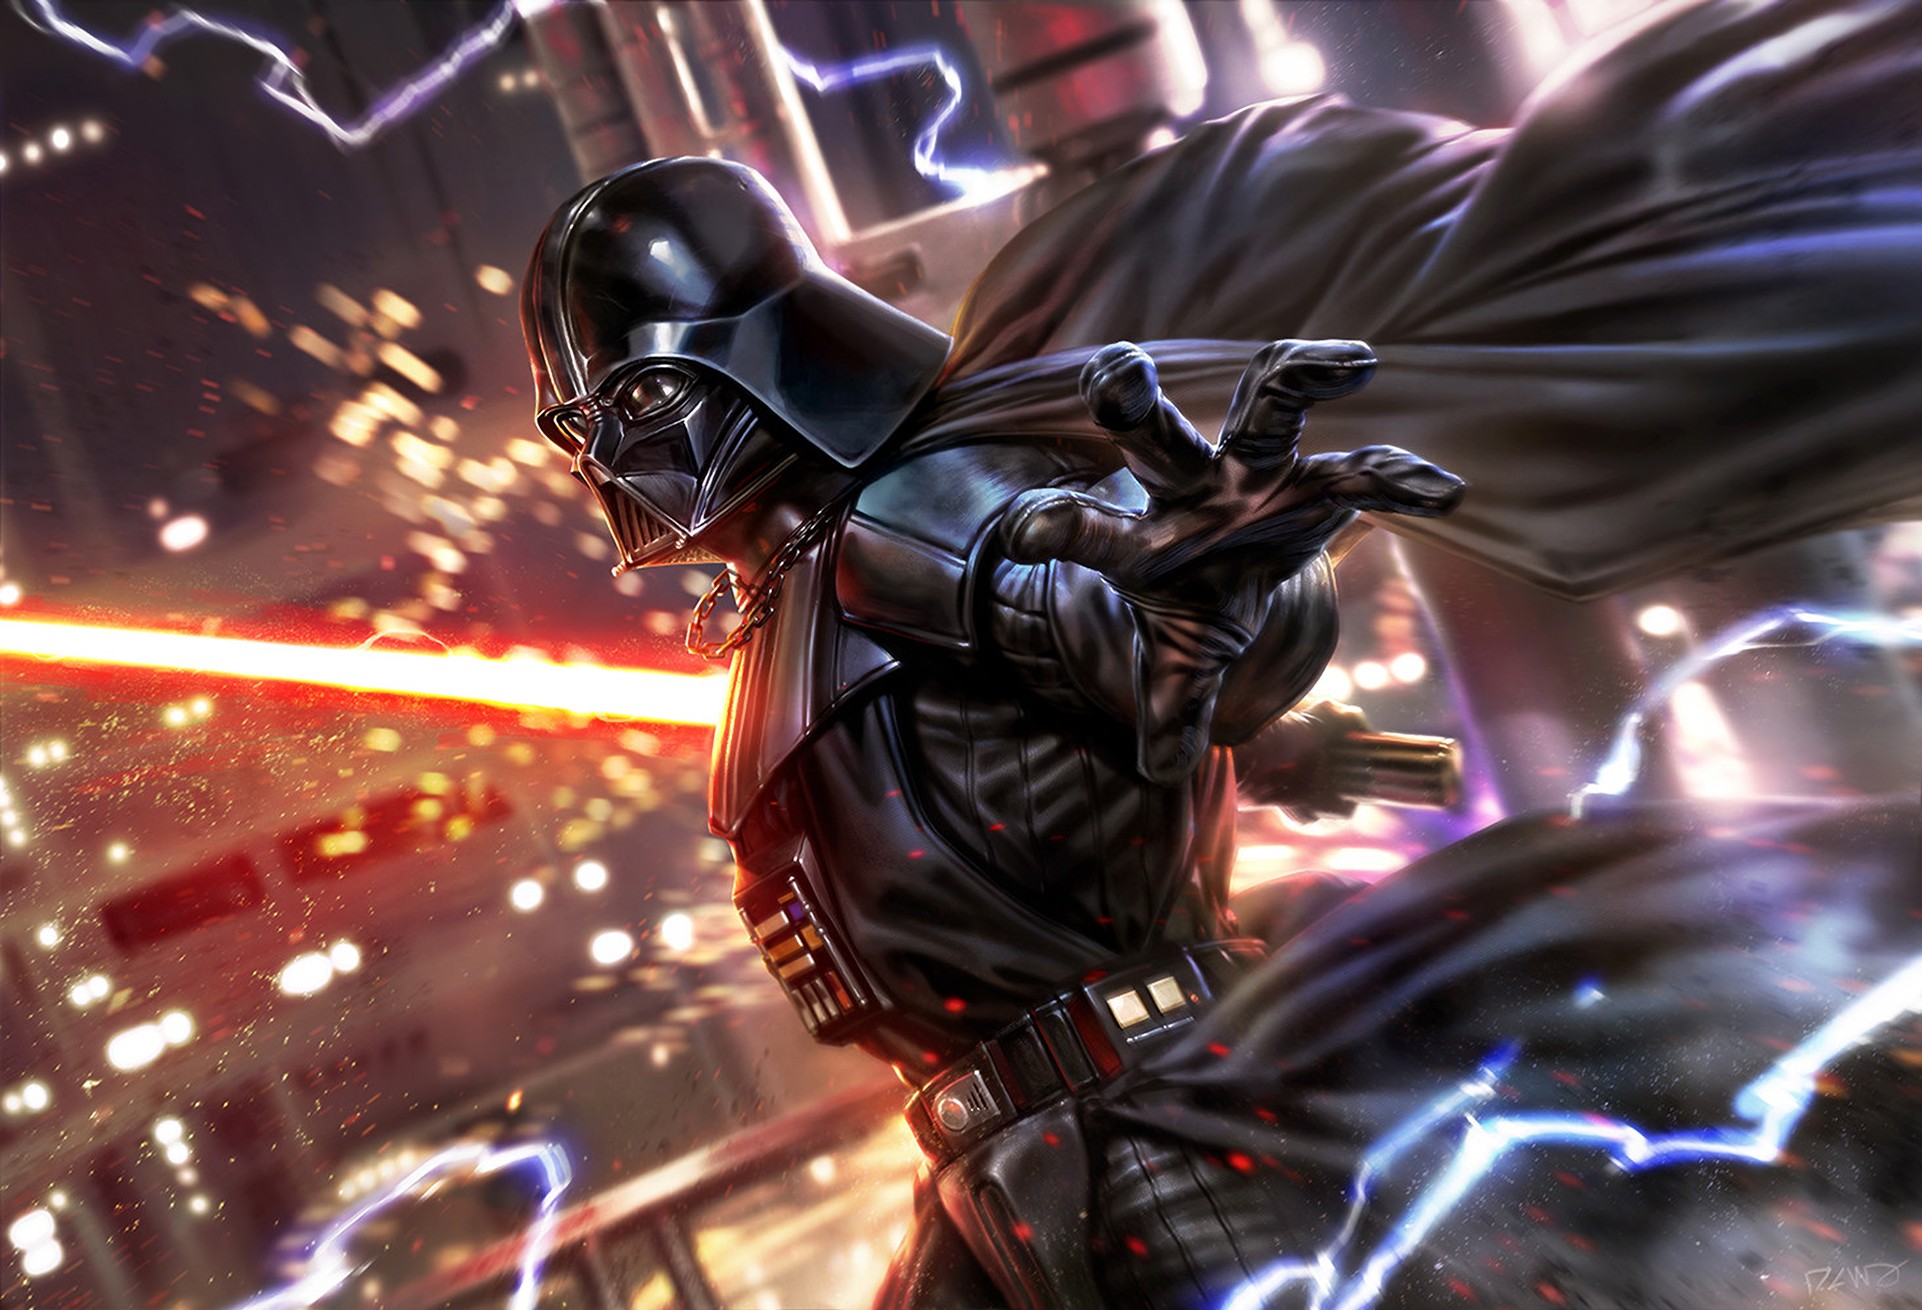 star wars fan art wallpaper,action adventure game,fictional character,pc game,cg artwork,games